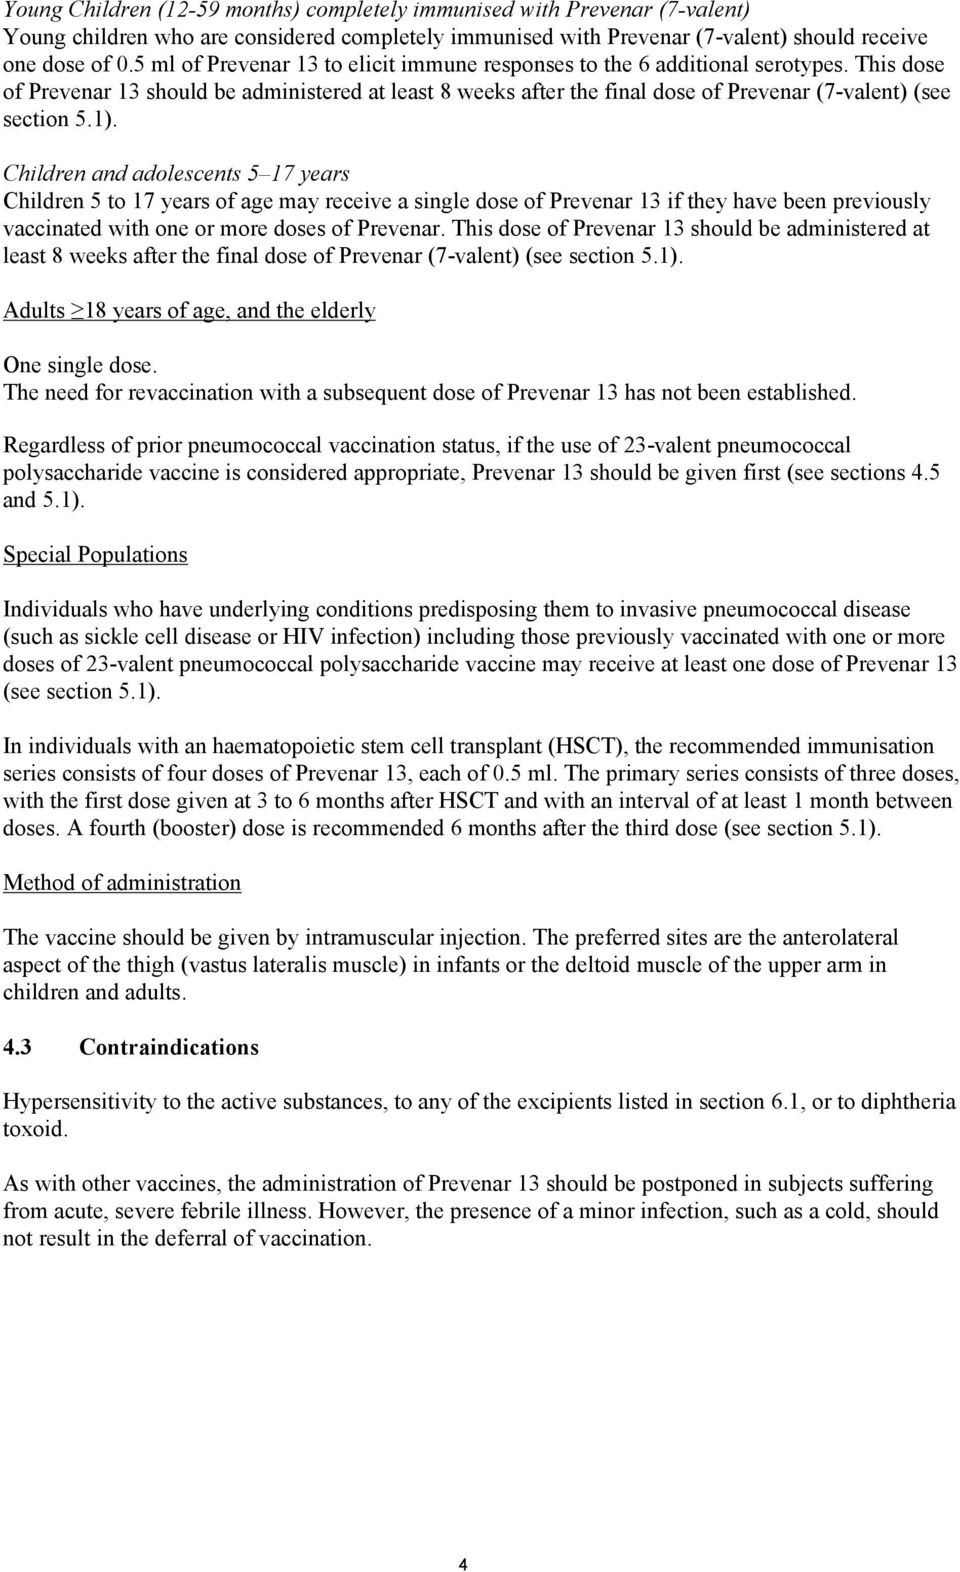 This dose of Prevenar 13 should be administered at least 8 weeks after the final dose of Prevenar (7-valent) (see section 5.1).